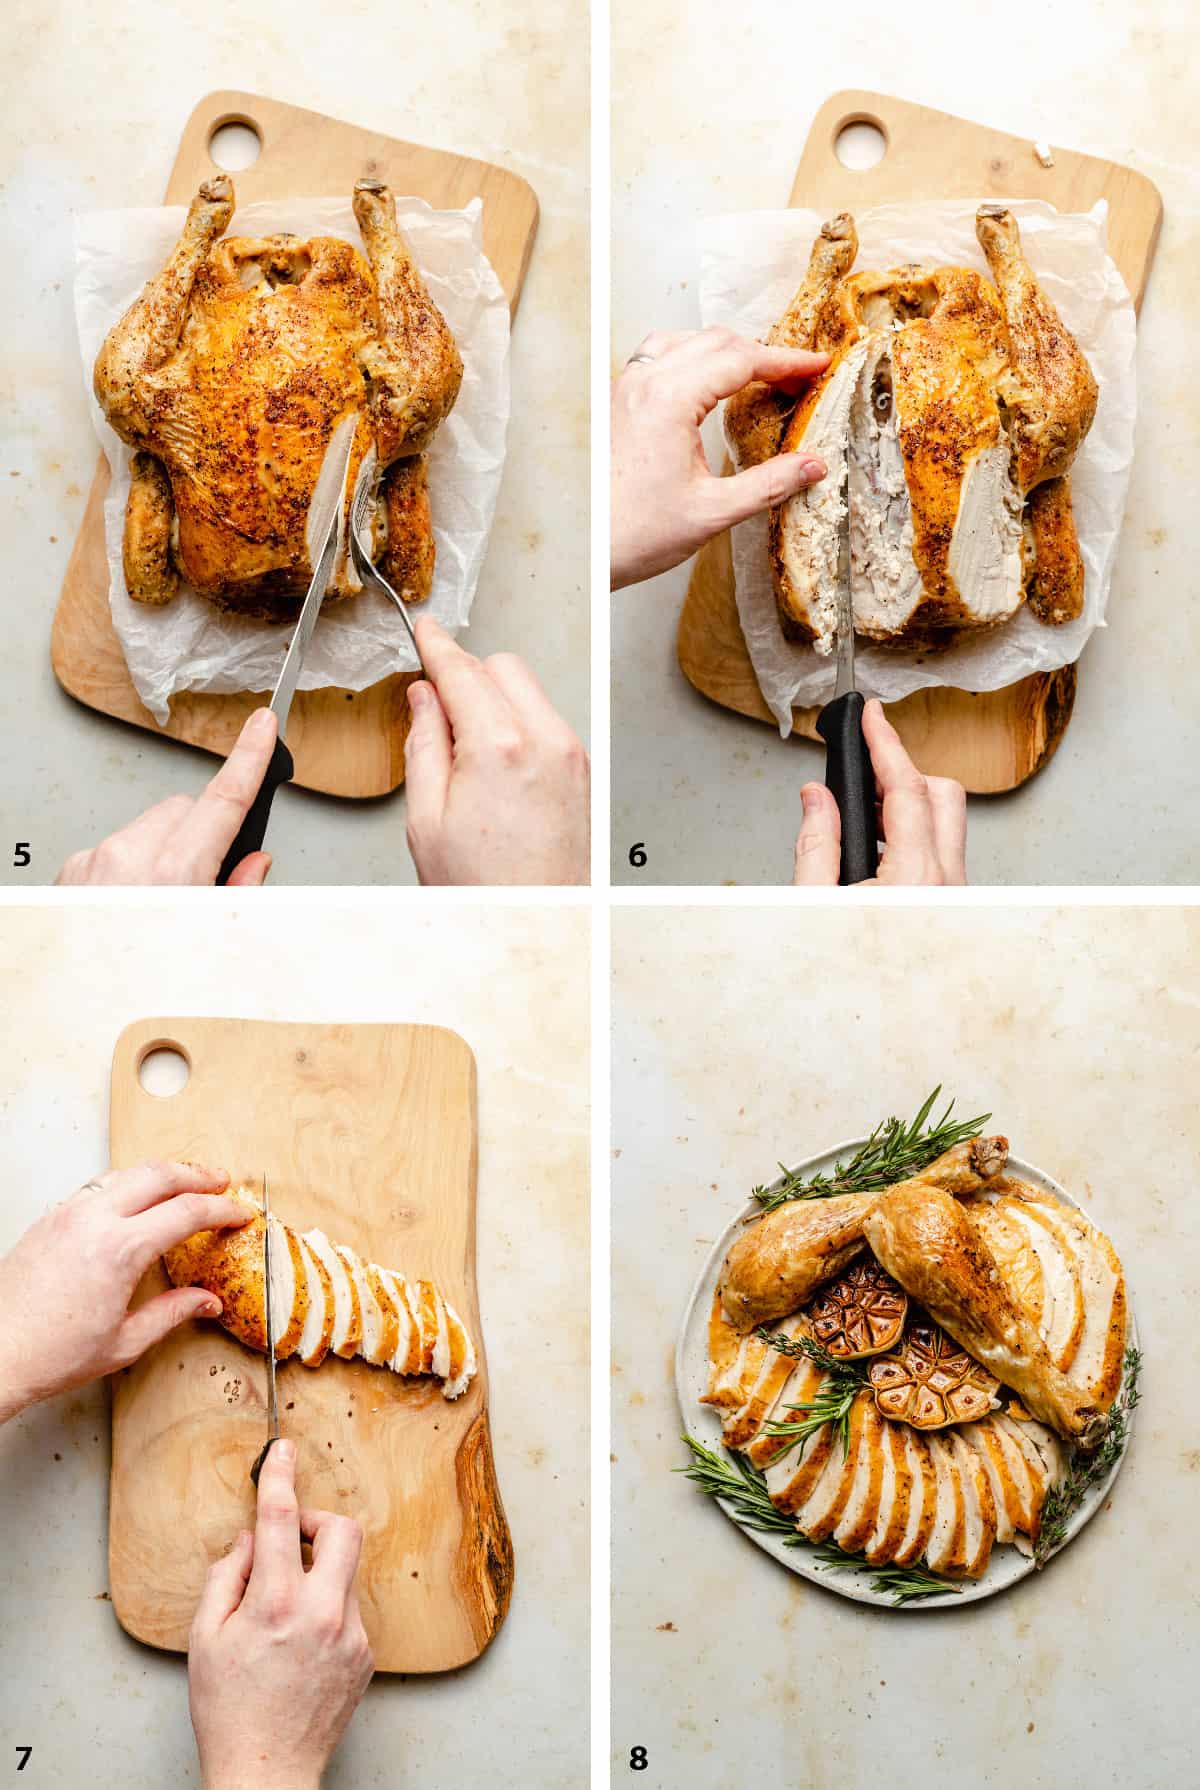 Process steps showing two different ways to carve a chicken, then served on a plate.